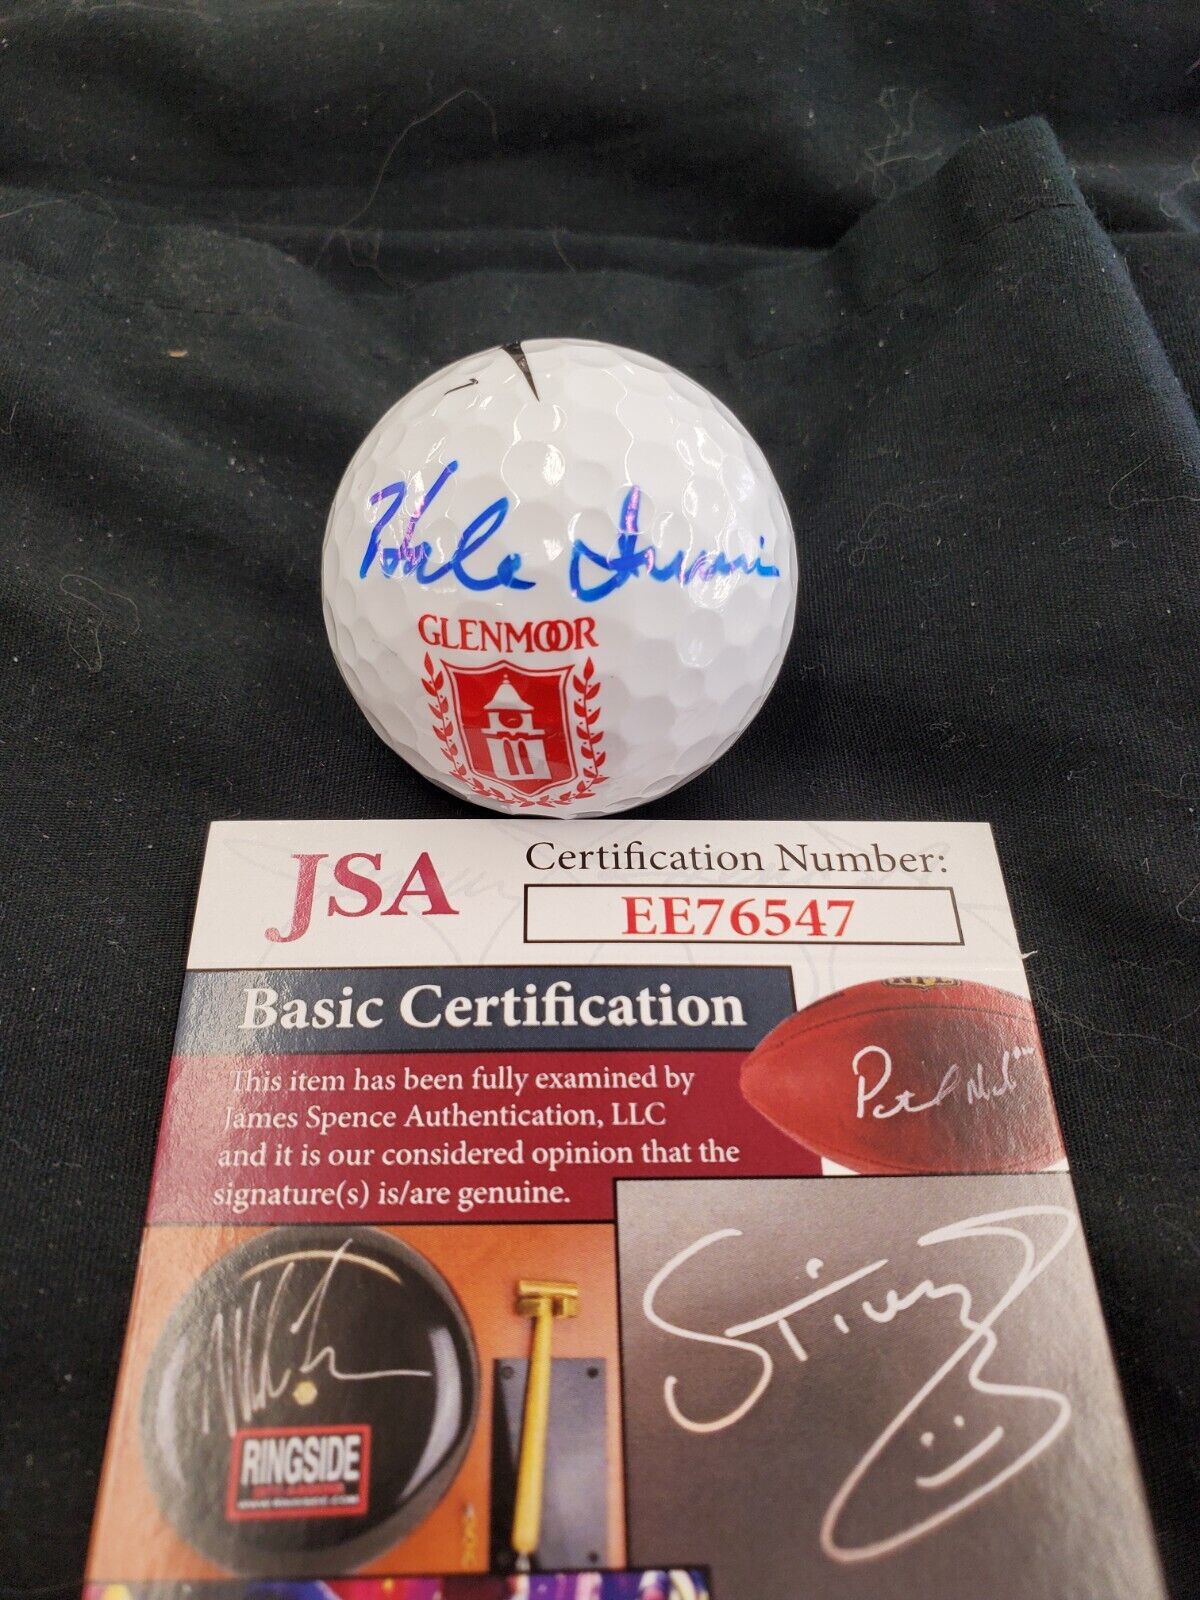 Hale Irwin Signed Golf Ball Autograph JSA COA EE76547 WITH CUBE